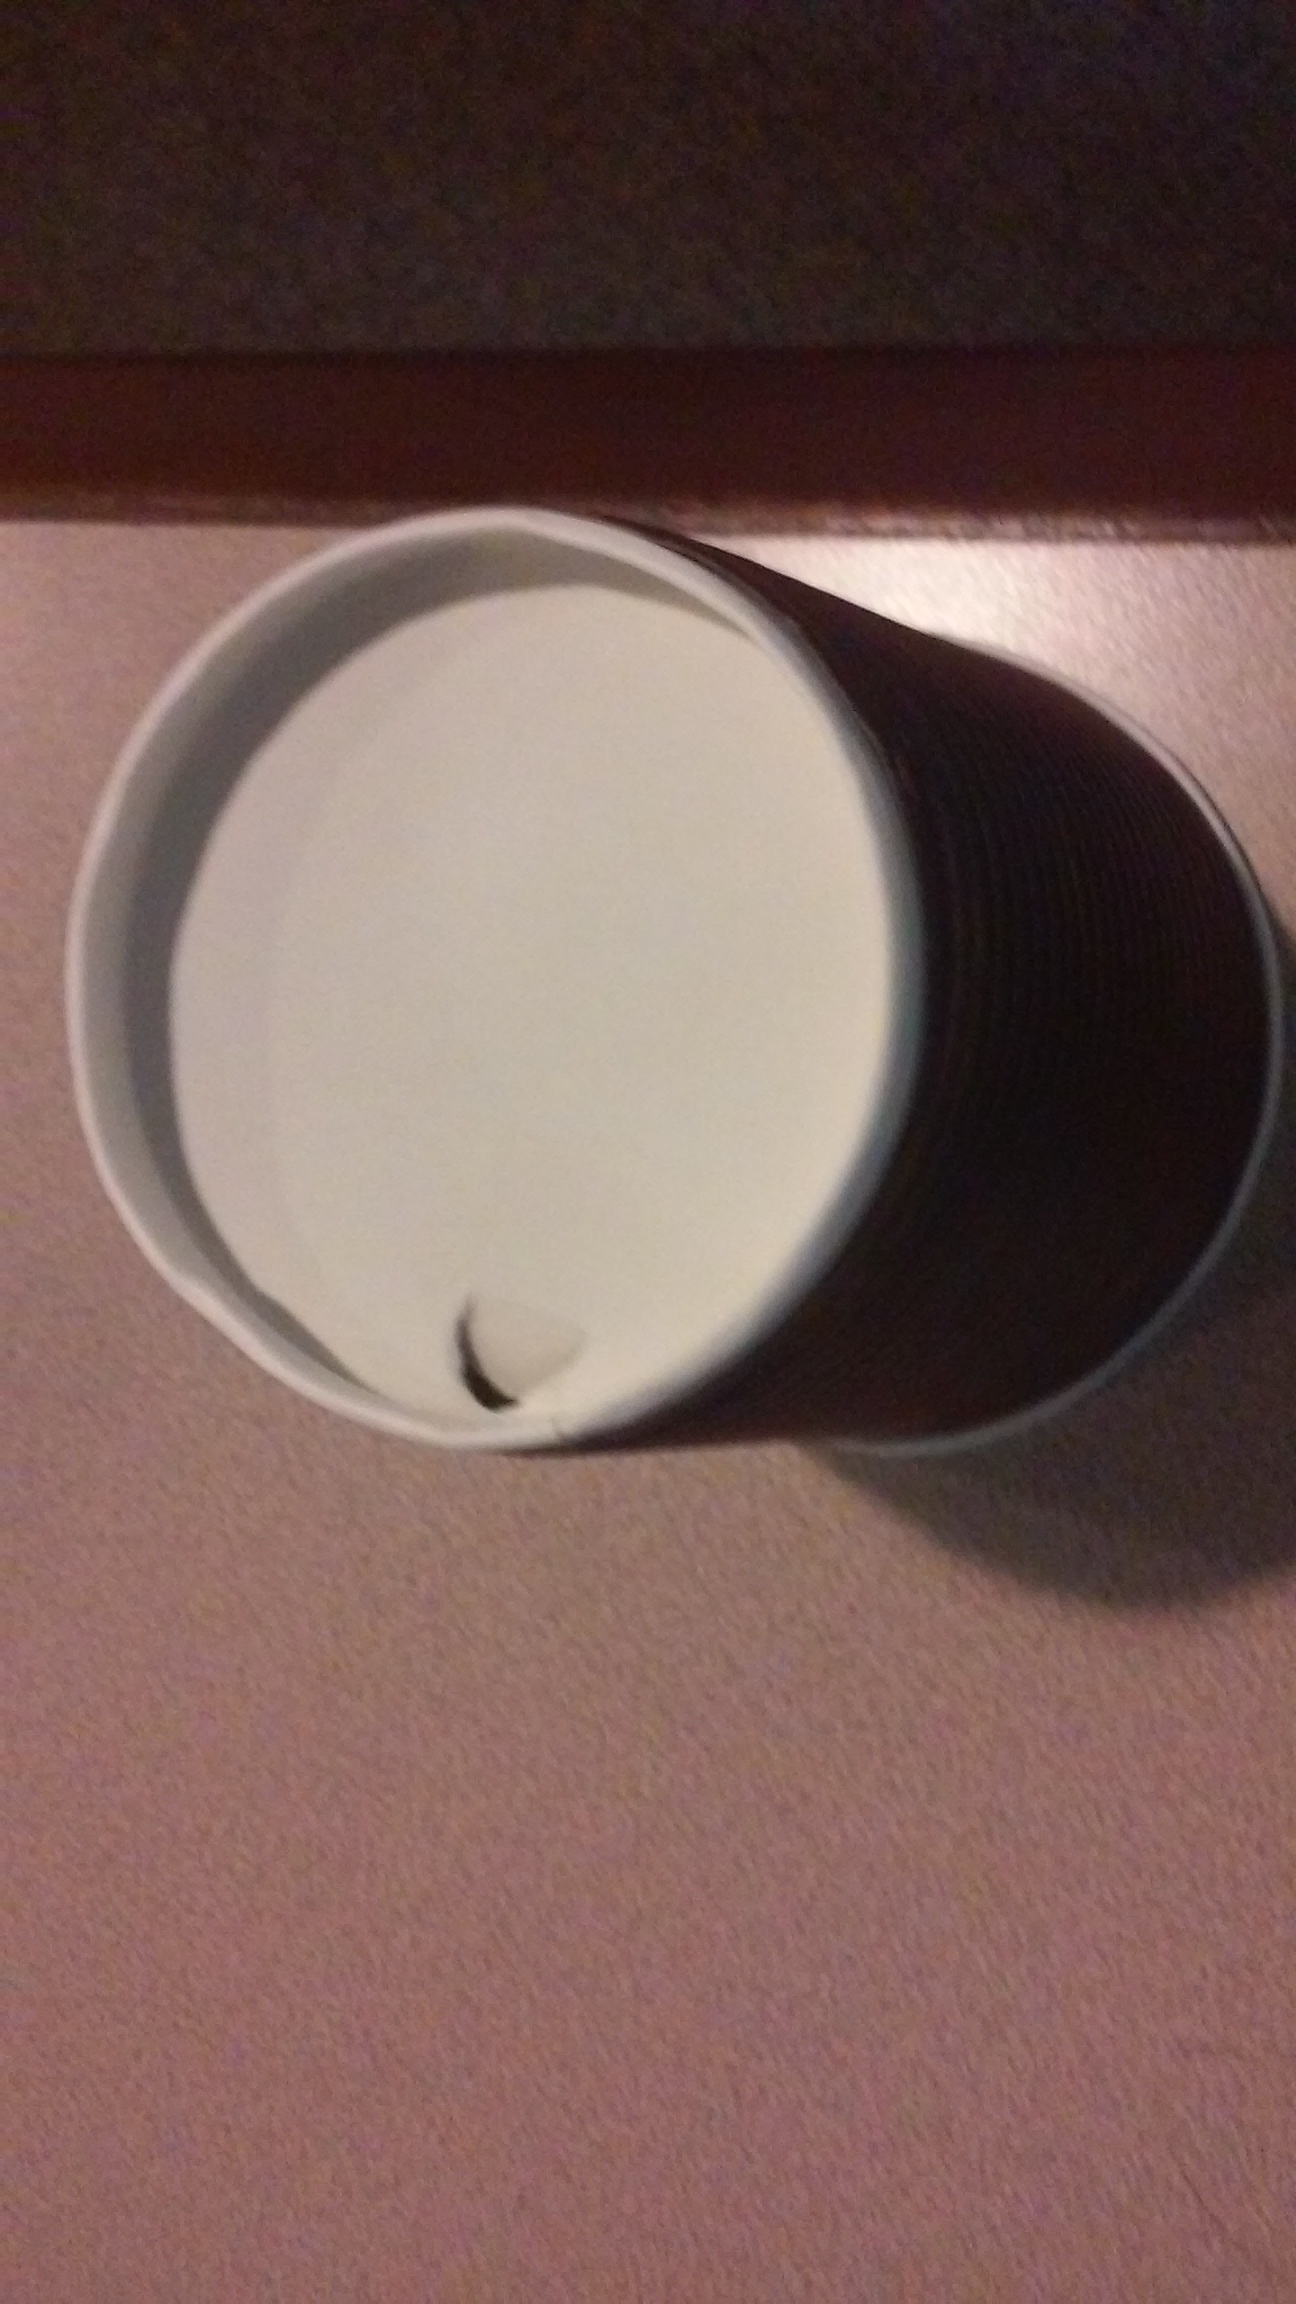 The Old “Punch A Hole In The Cup To Surprise The Next Guest” Ploy